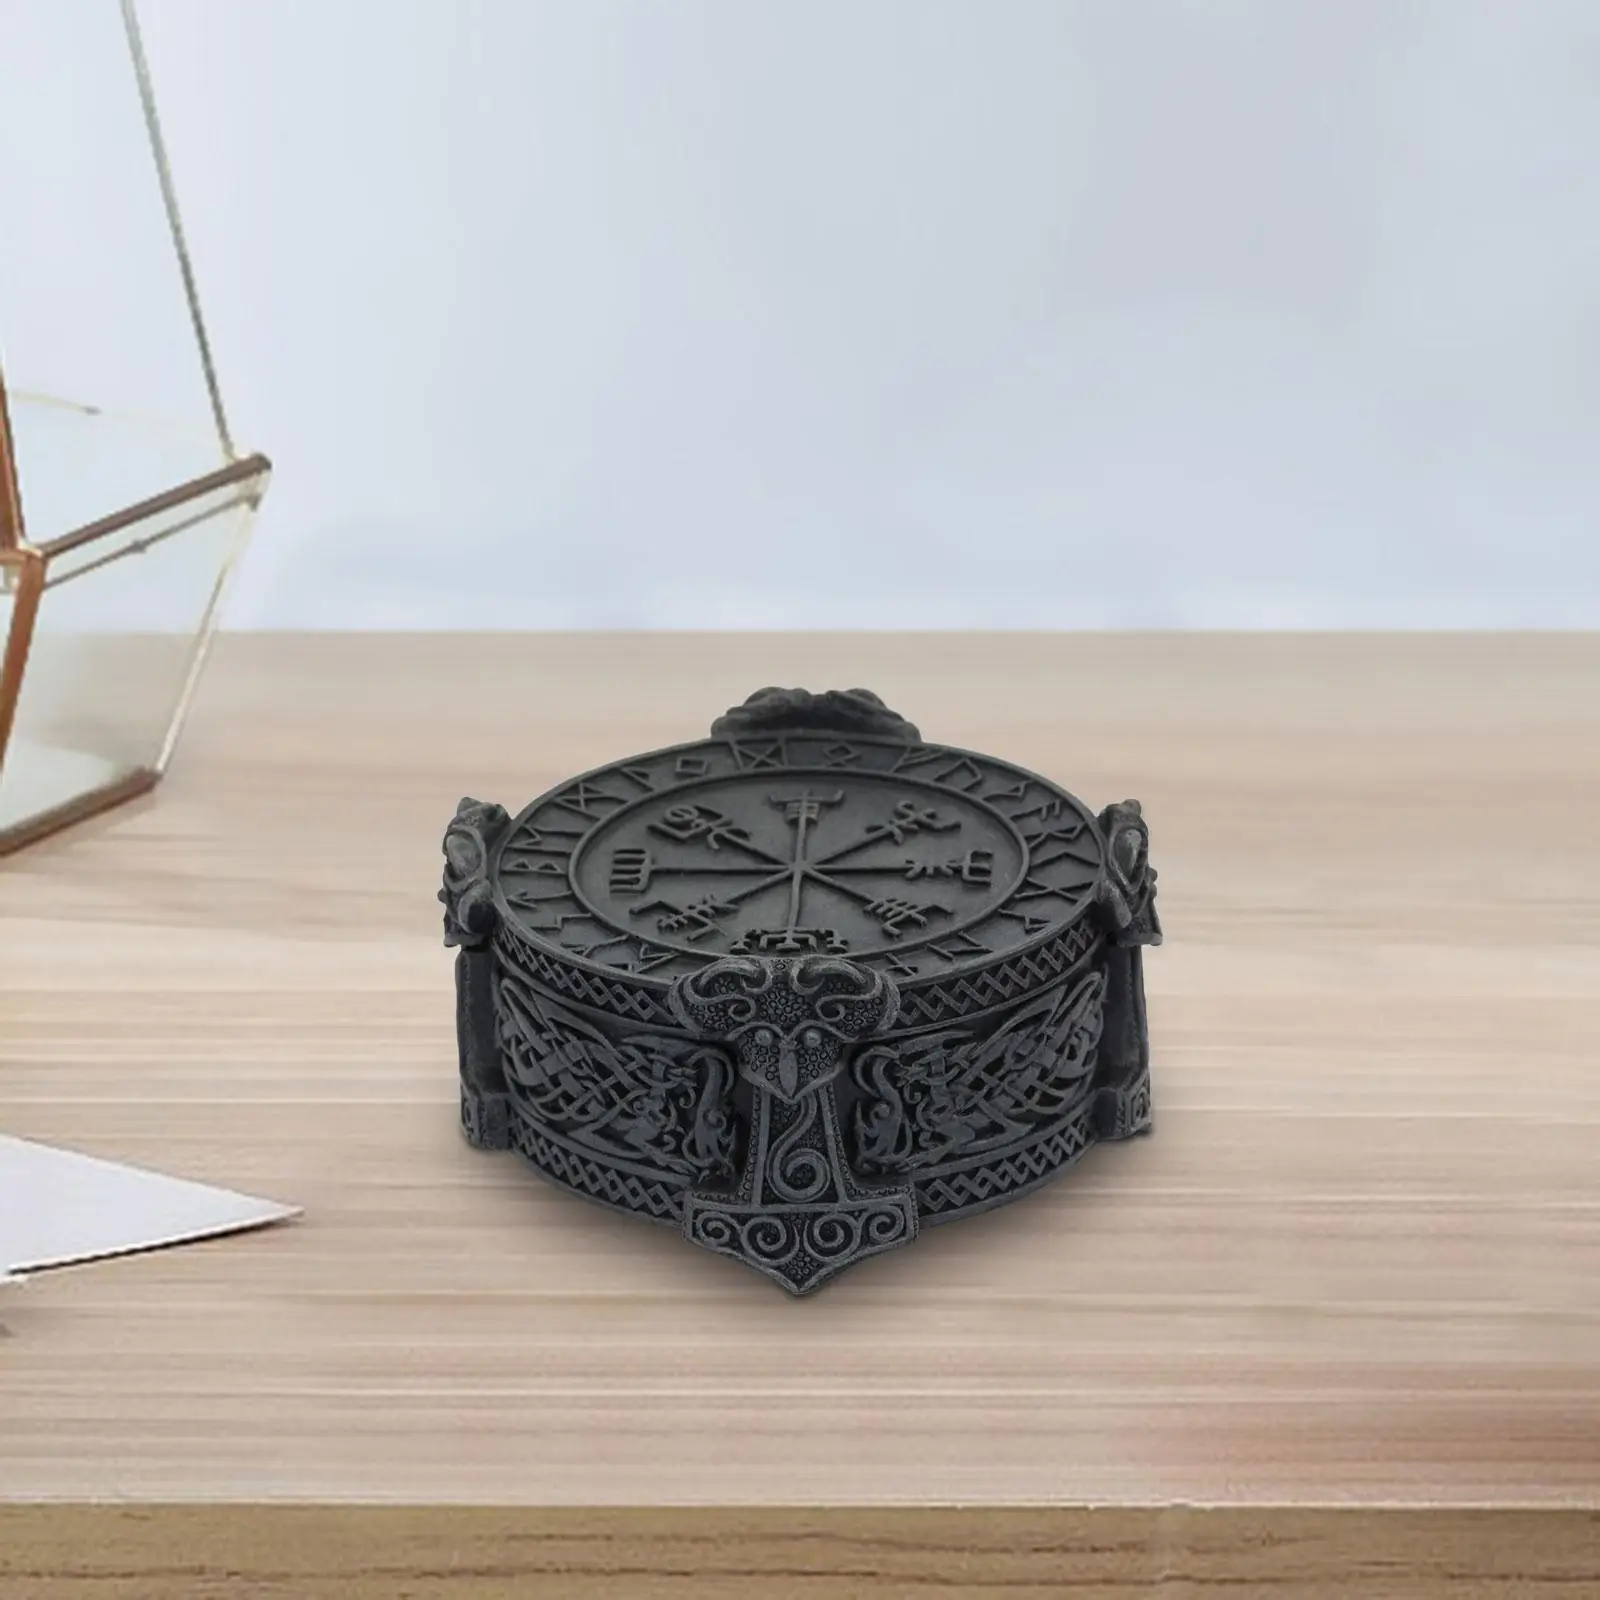 Trinket Jewelry Box Tabletop Ornaments Display Holder Viking for Home Decor Centerpiece Birthday Gift Collectible Necklaces